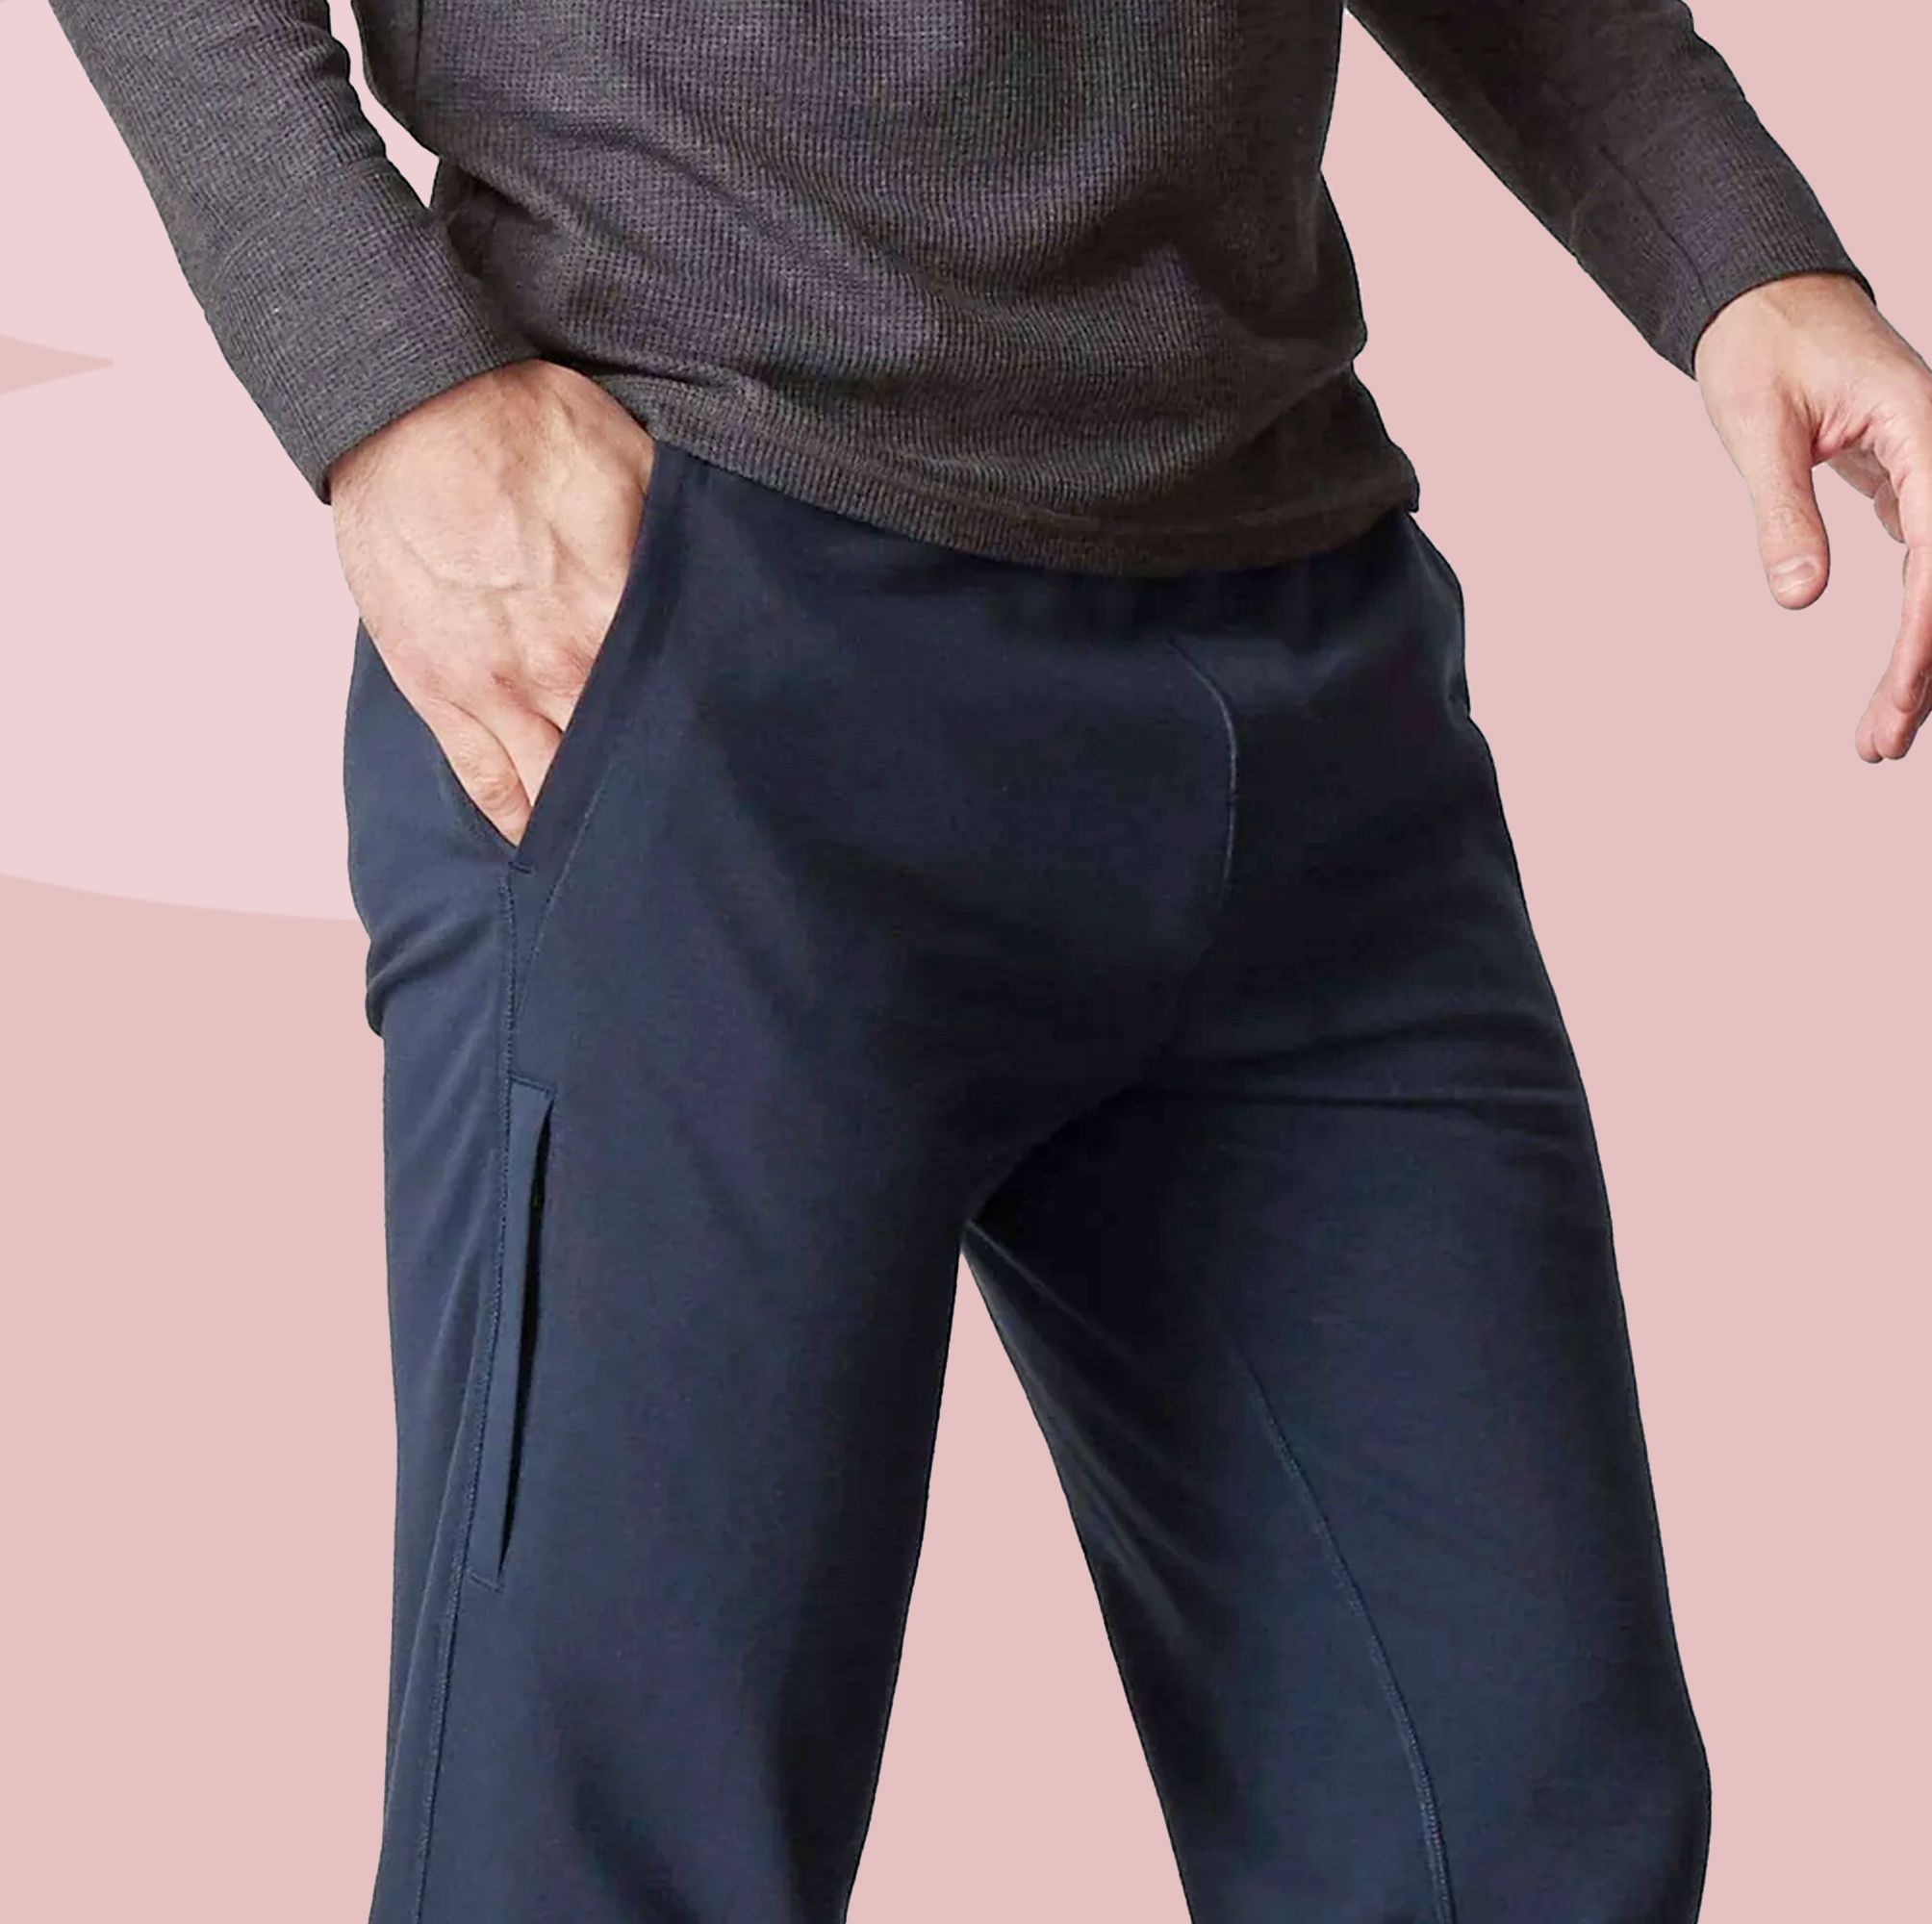 The Best Sweatpants to Wear Absolutely Everywhere